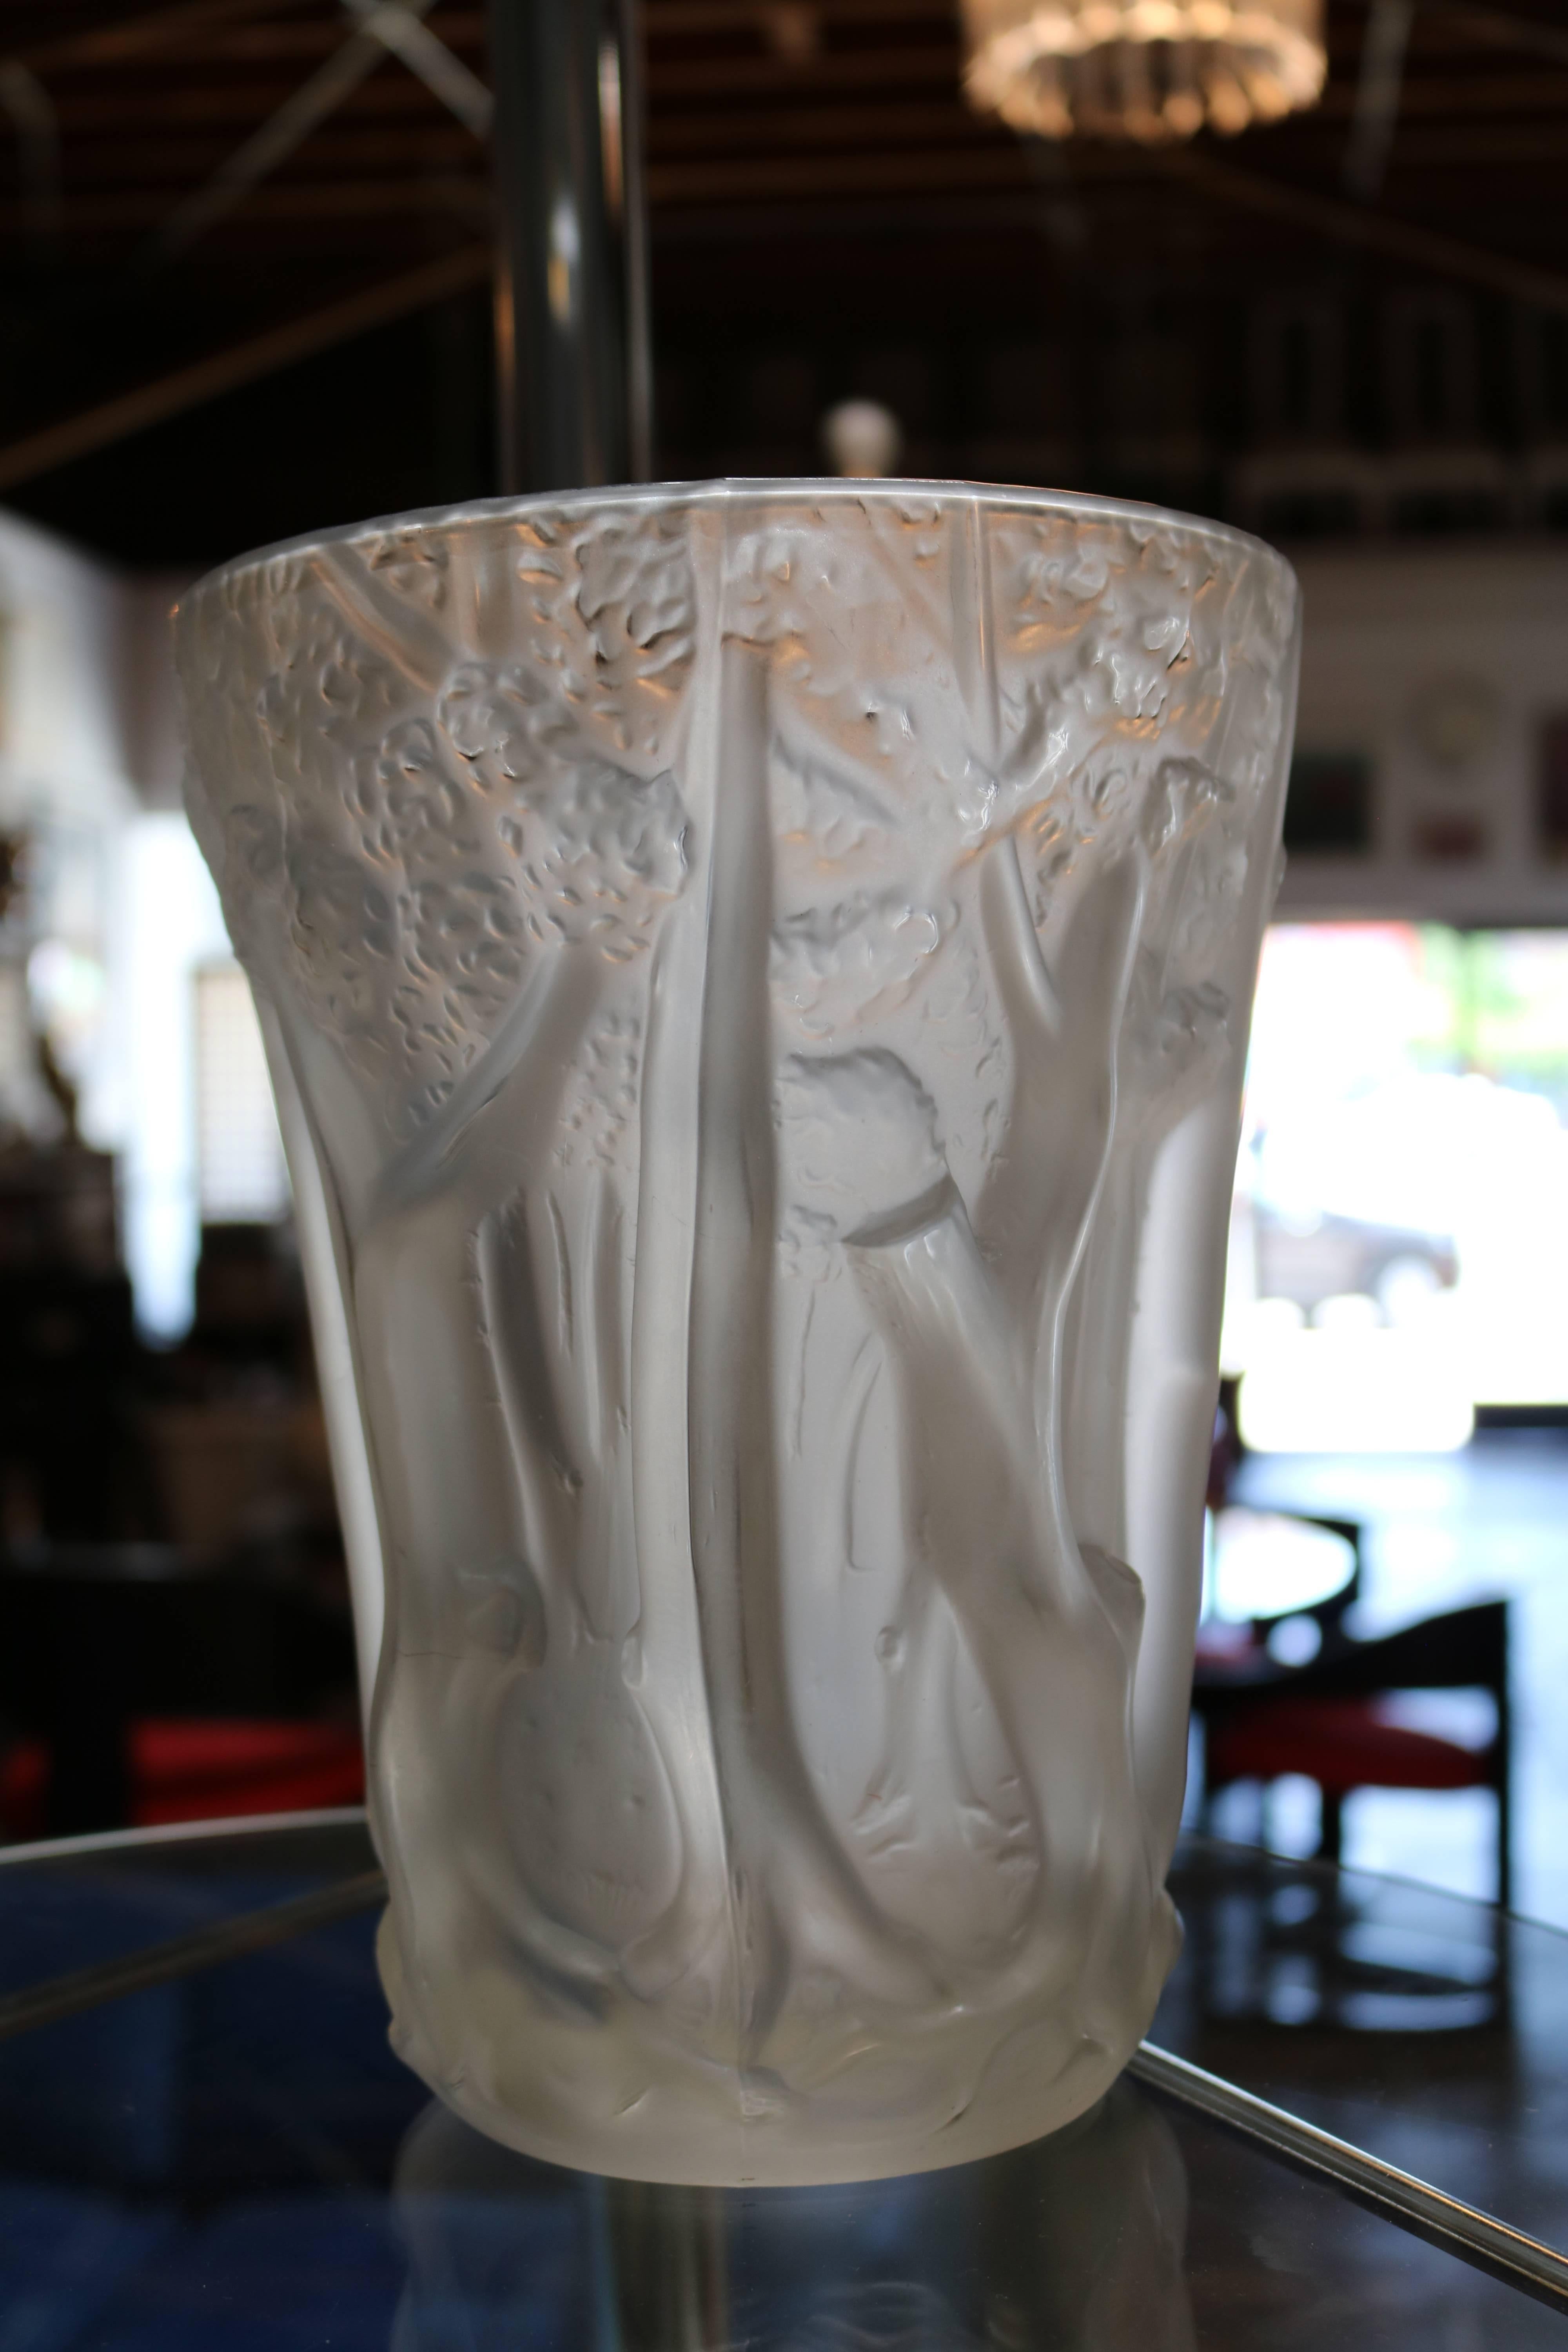 Thick and heavy frosted molded glass vase has multi-dimensional trees shown in relief. Bottom of vase measures 4.75" in diameter.